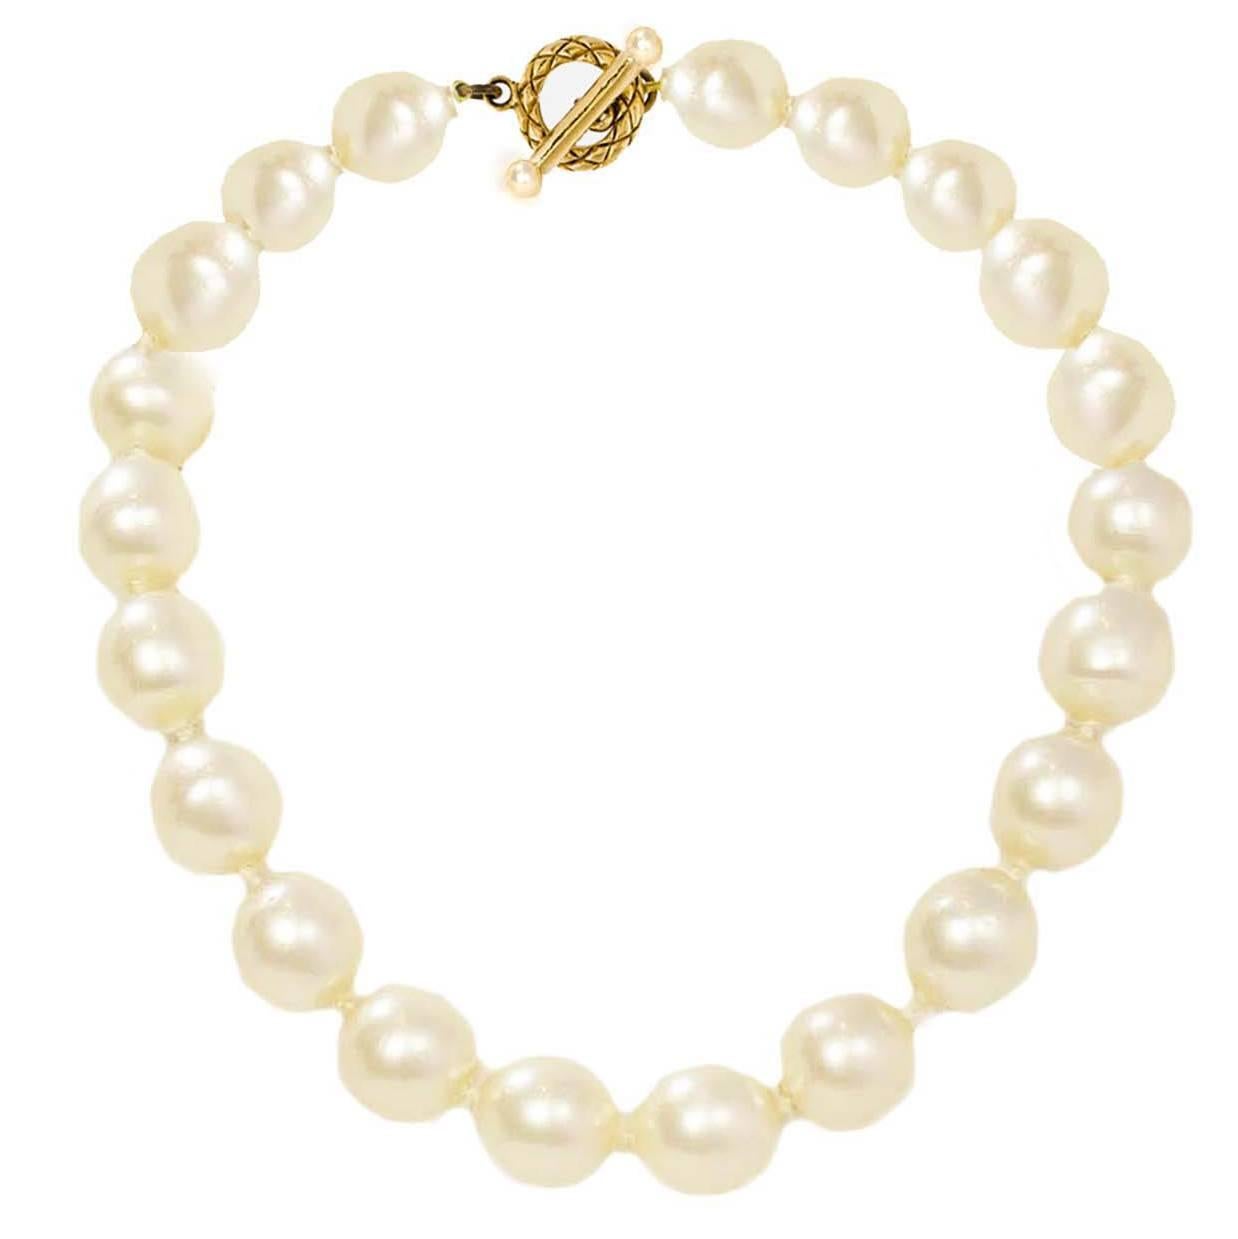 Chanel pearl long necklace - 2010s second hand vintage